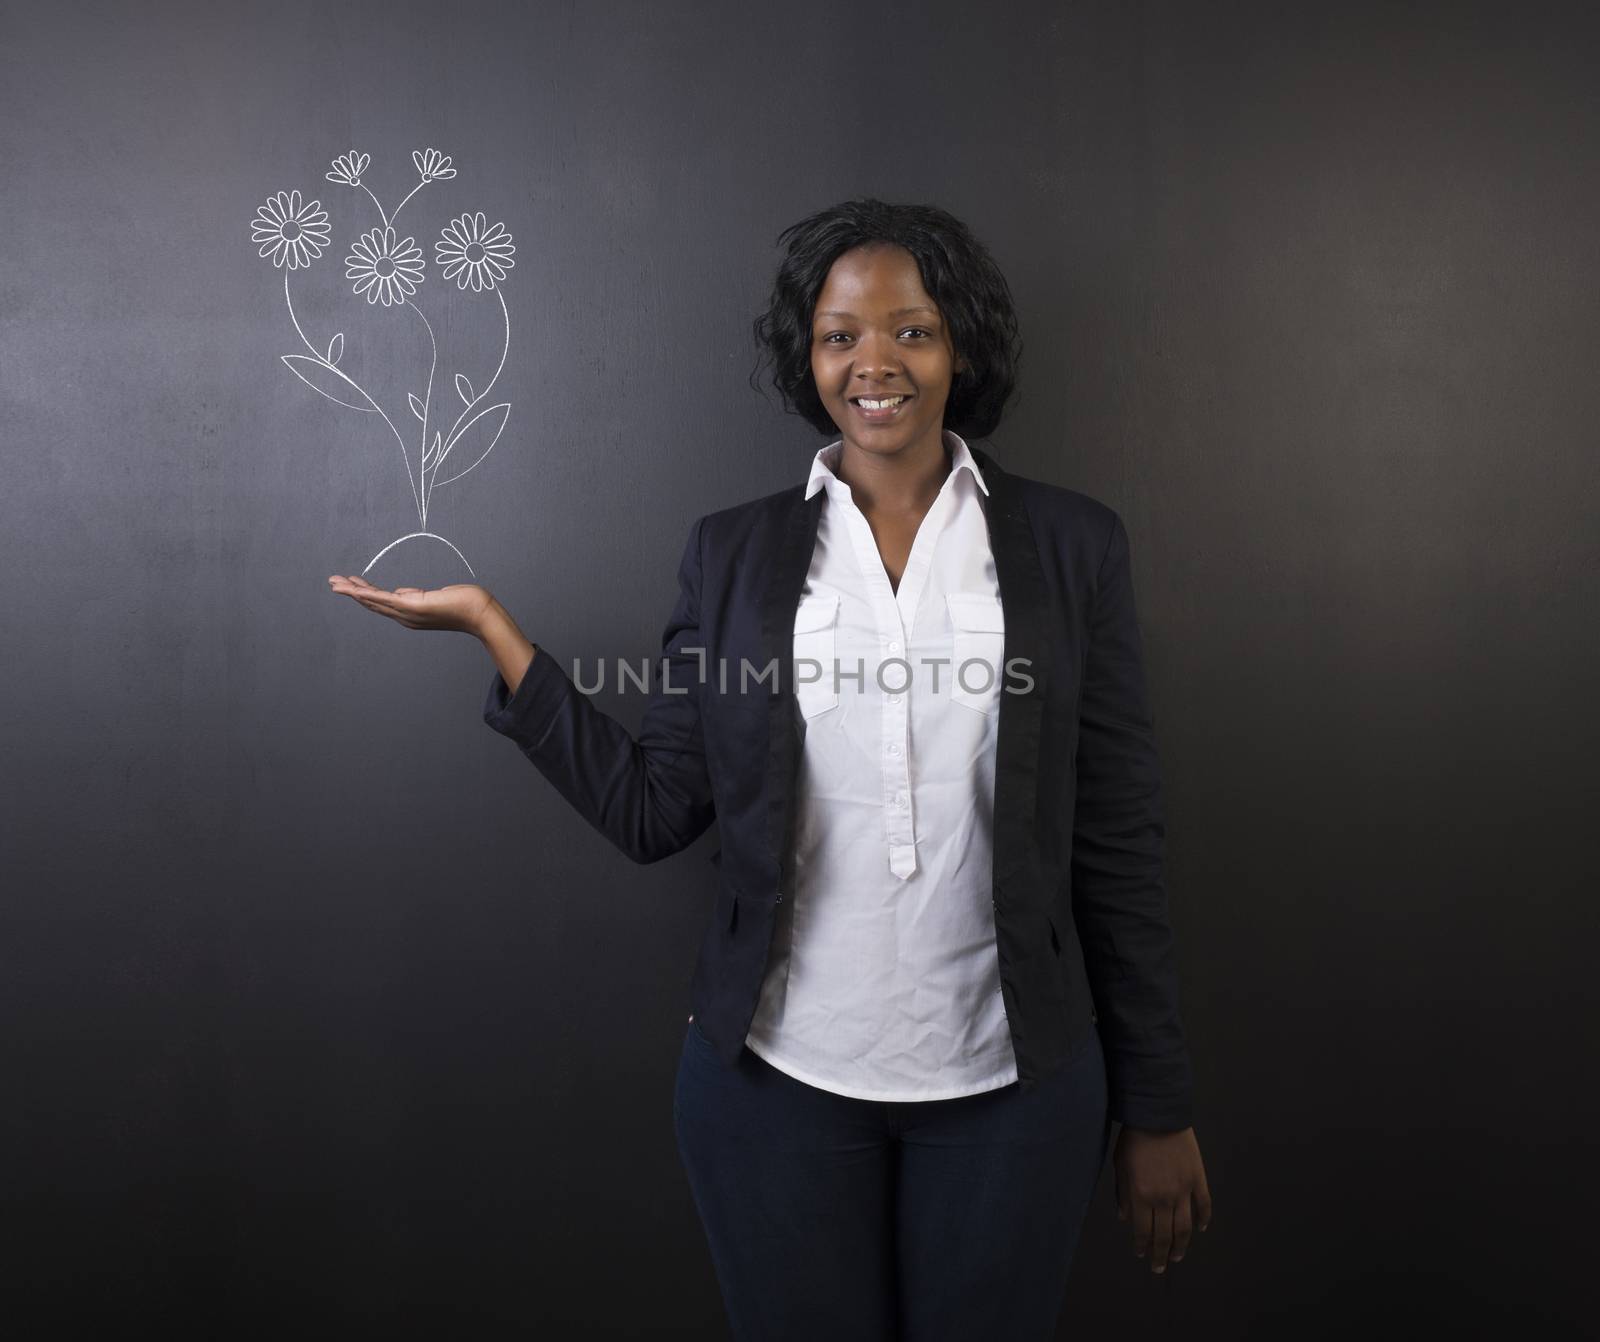 South African or African American woman teacher or student holding her hand out standing against a blackboard background holding chalk growing flowers